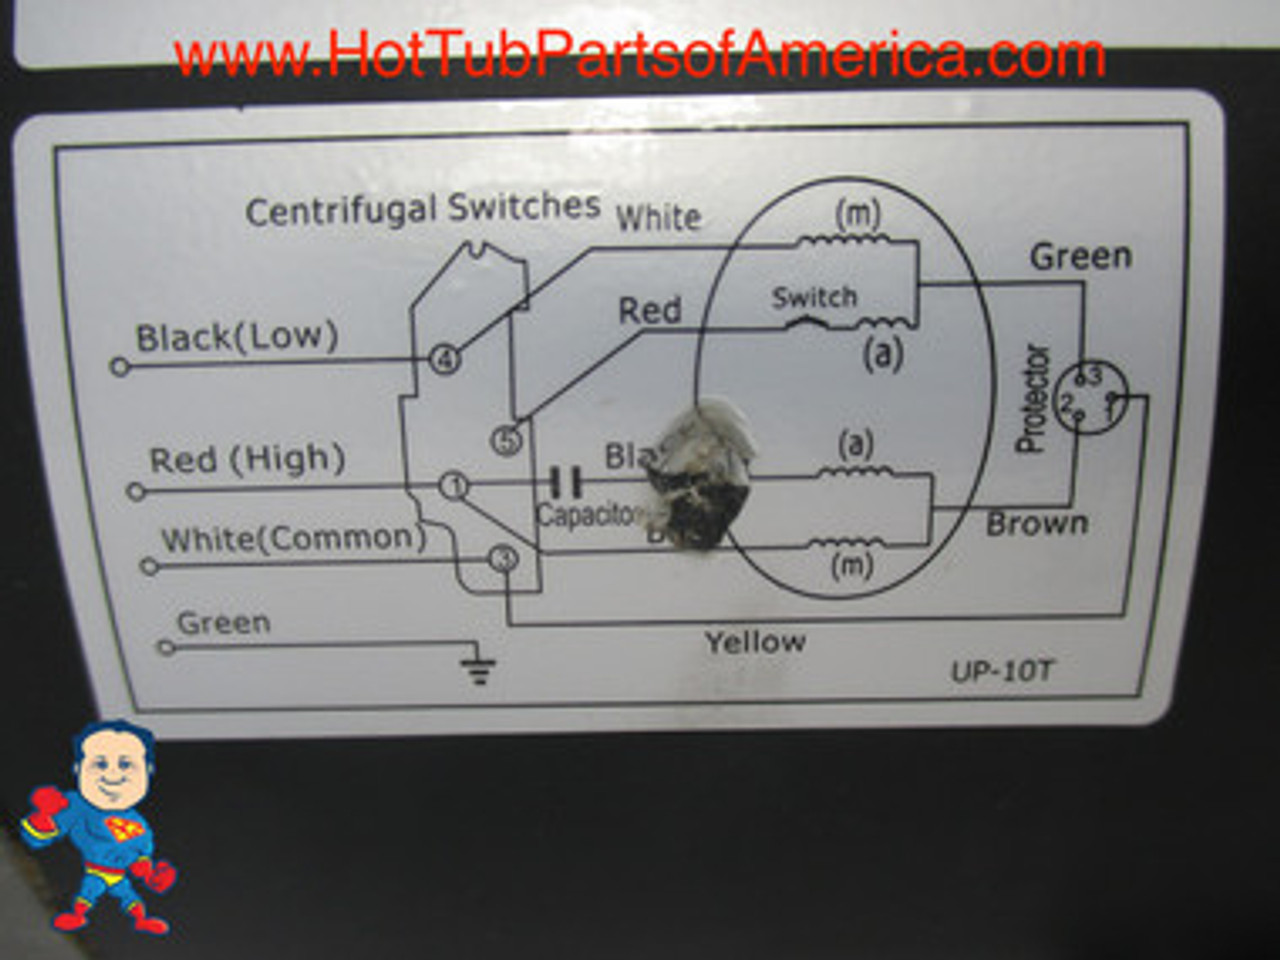 When putting your cord back on the new pump note C= Common or the White Wire, L= Low Speed and is usually the Black Wire and rarely the Red Wire, H=High Speed and is usually the Red Wire but occasionally the Black, Green = Ground or the Green wire. They way you can tell if you have it wired correctly is when you power up the pump should go into Low Speed First. If it goes into High Speed you need to power down and reverse the red & black wires and power back up and verify it goes into Low Speed first. If you leave it wrong it will overheat and damage the Hot Tub especially during warm weather...